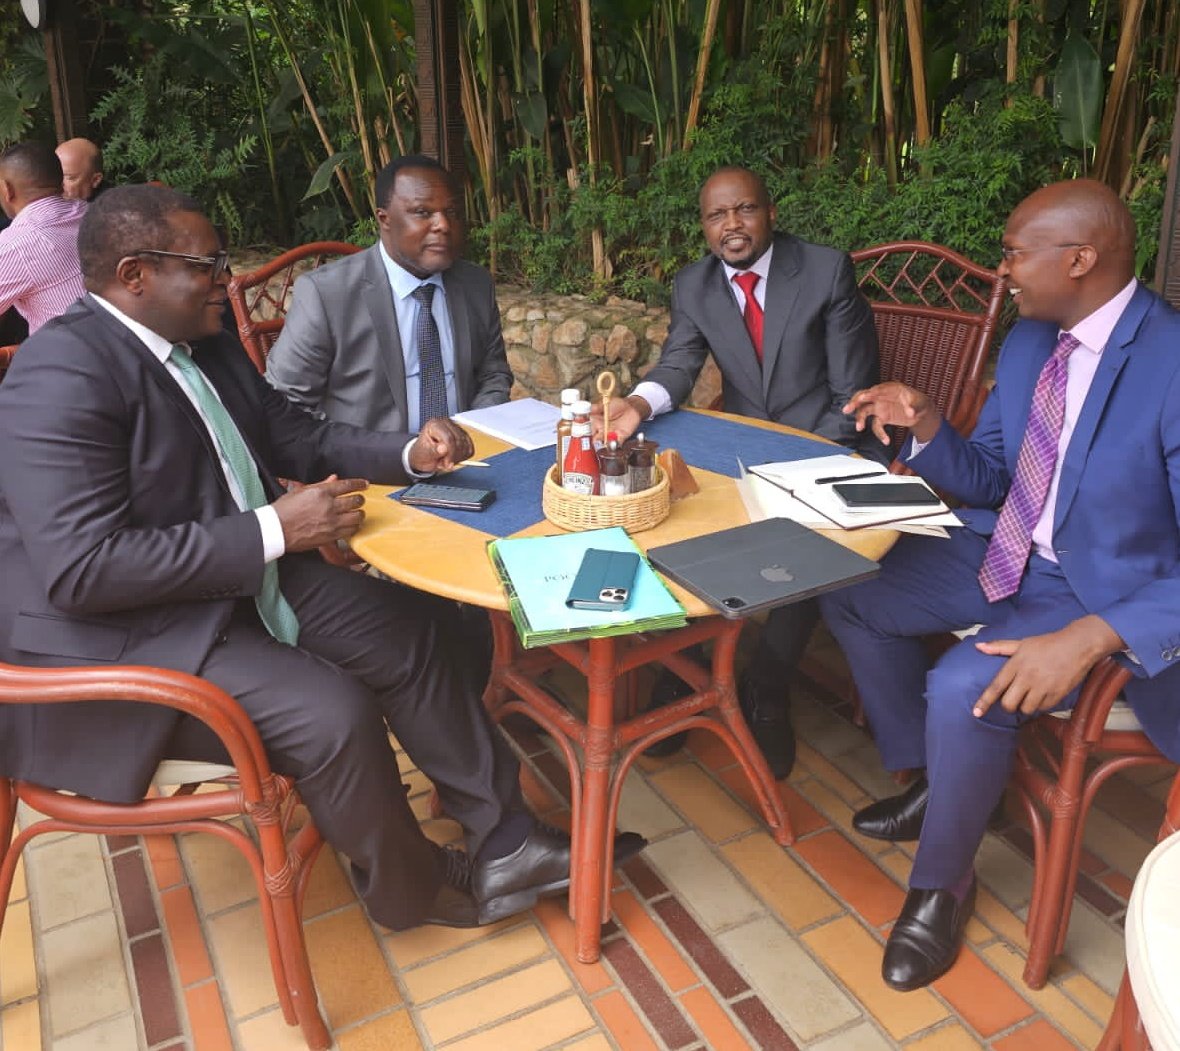 Had a chat with CS for Trade and Investment @HonMoses_Kuria and PS Dr. Mukhwana on actualization of an Industrial Park in Bungoma. We intend to become one of the pioneer counties to benefit with 100 Million allocated for Industrial parks for counties by the National government